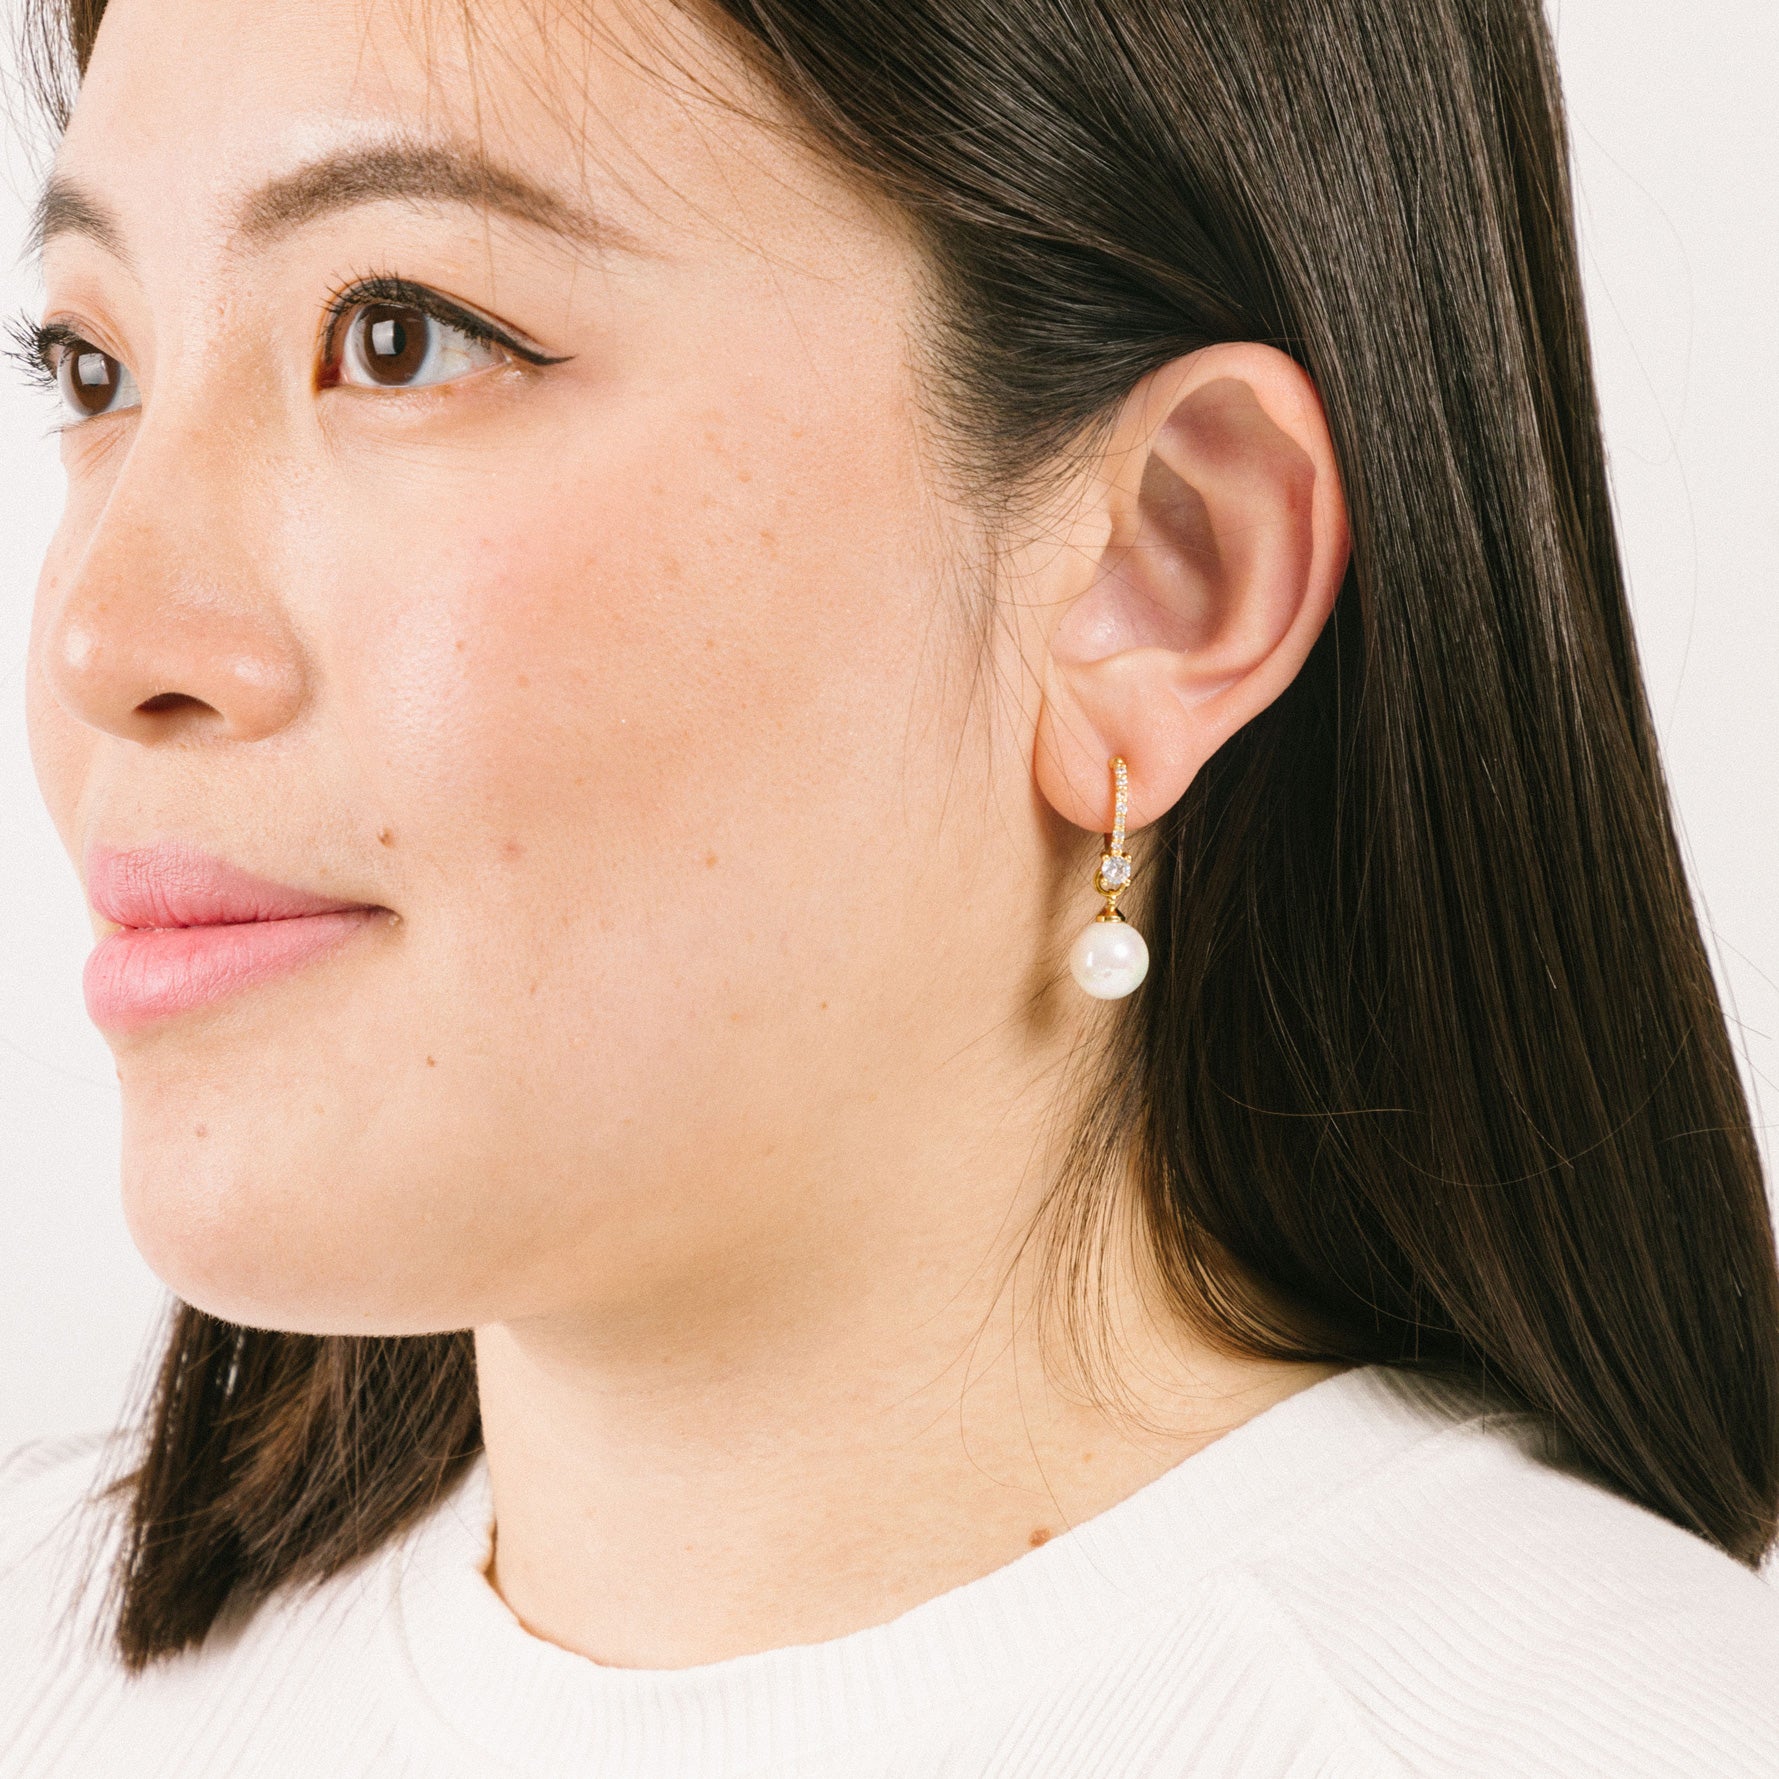 A model wearing the Claire Pearl Clip On Earrings in Gold bear Mosquito Coil Clip-Ons, offering a secure, comfortable fit for all types of ears - from Thick/Large to Sensitive, Small/Thin, and even Stretched/Healing - for up to 24 hours. Meticulously fashioned from 18K Gold plated metal alloy, Cubic Zirconia, and Simulated Faux Pearl, this chic design is Non-Tarnish and Water Resistant.